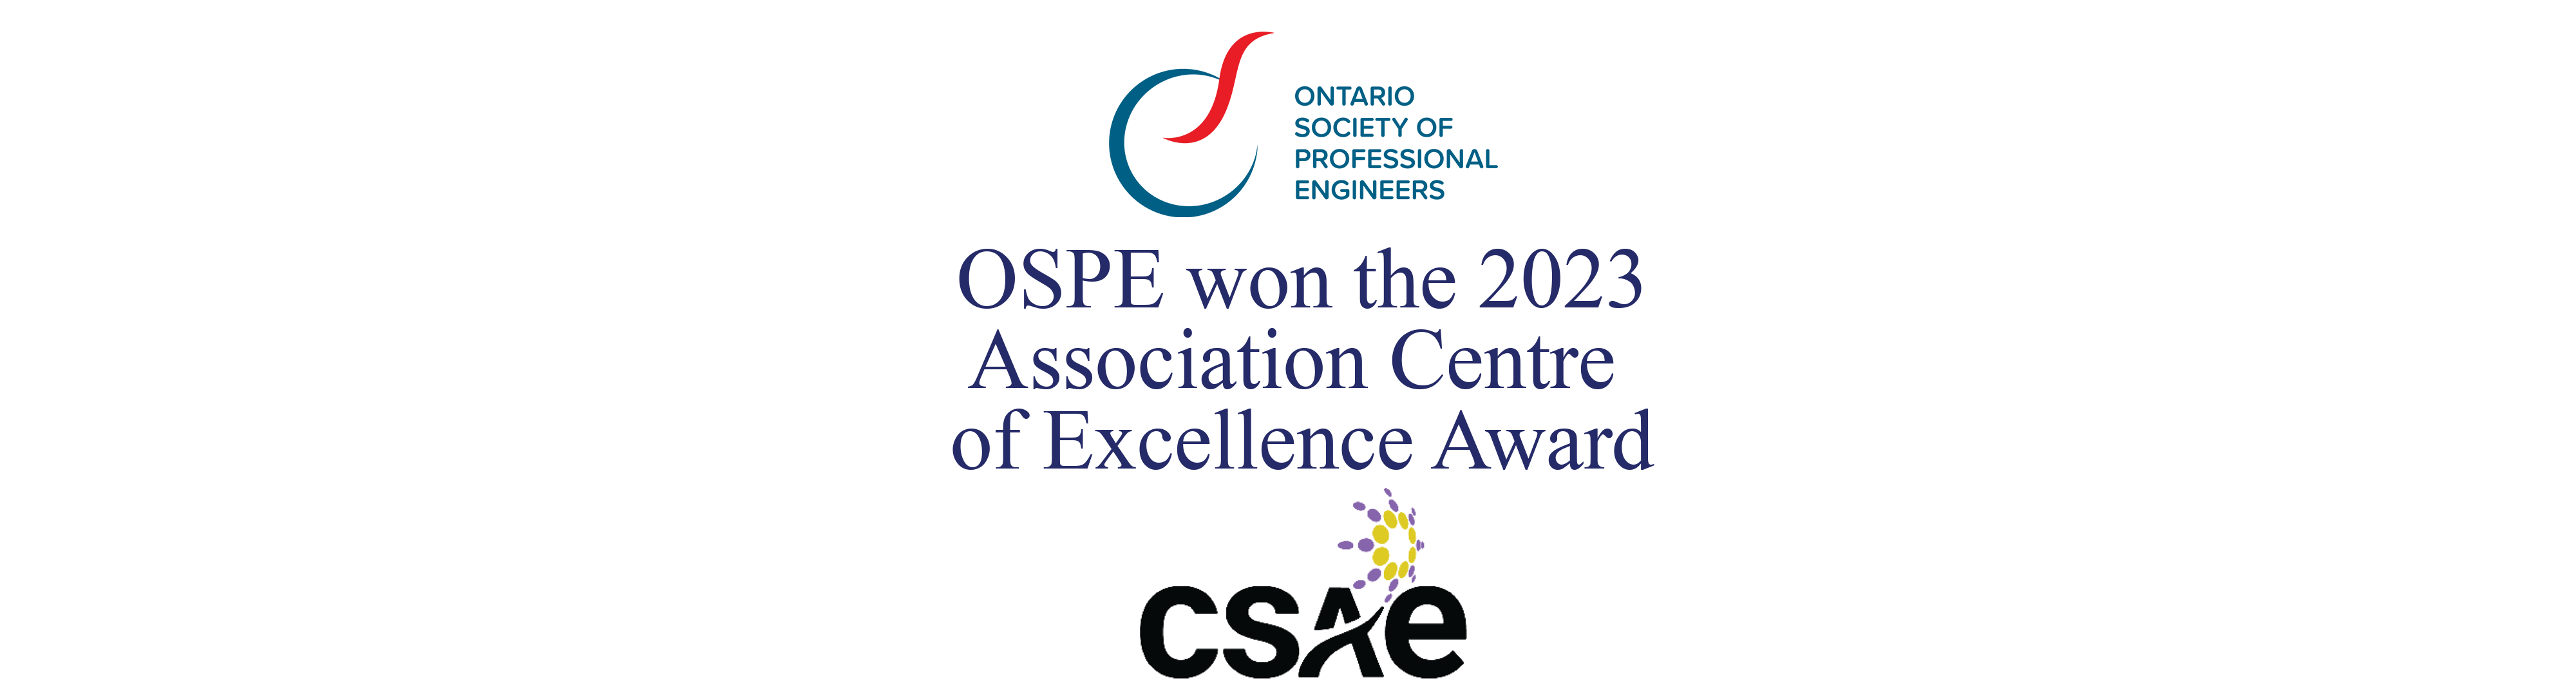 Halmyre is extremely proud of OSPE's accomplishment.